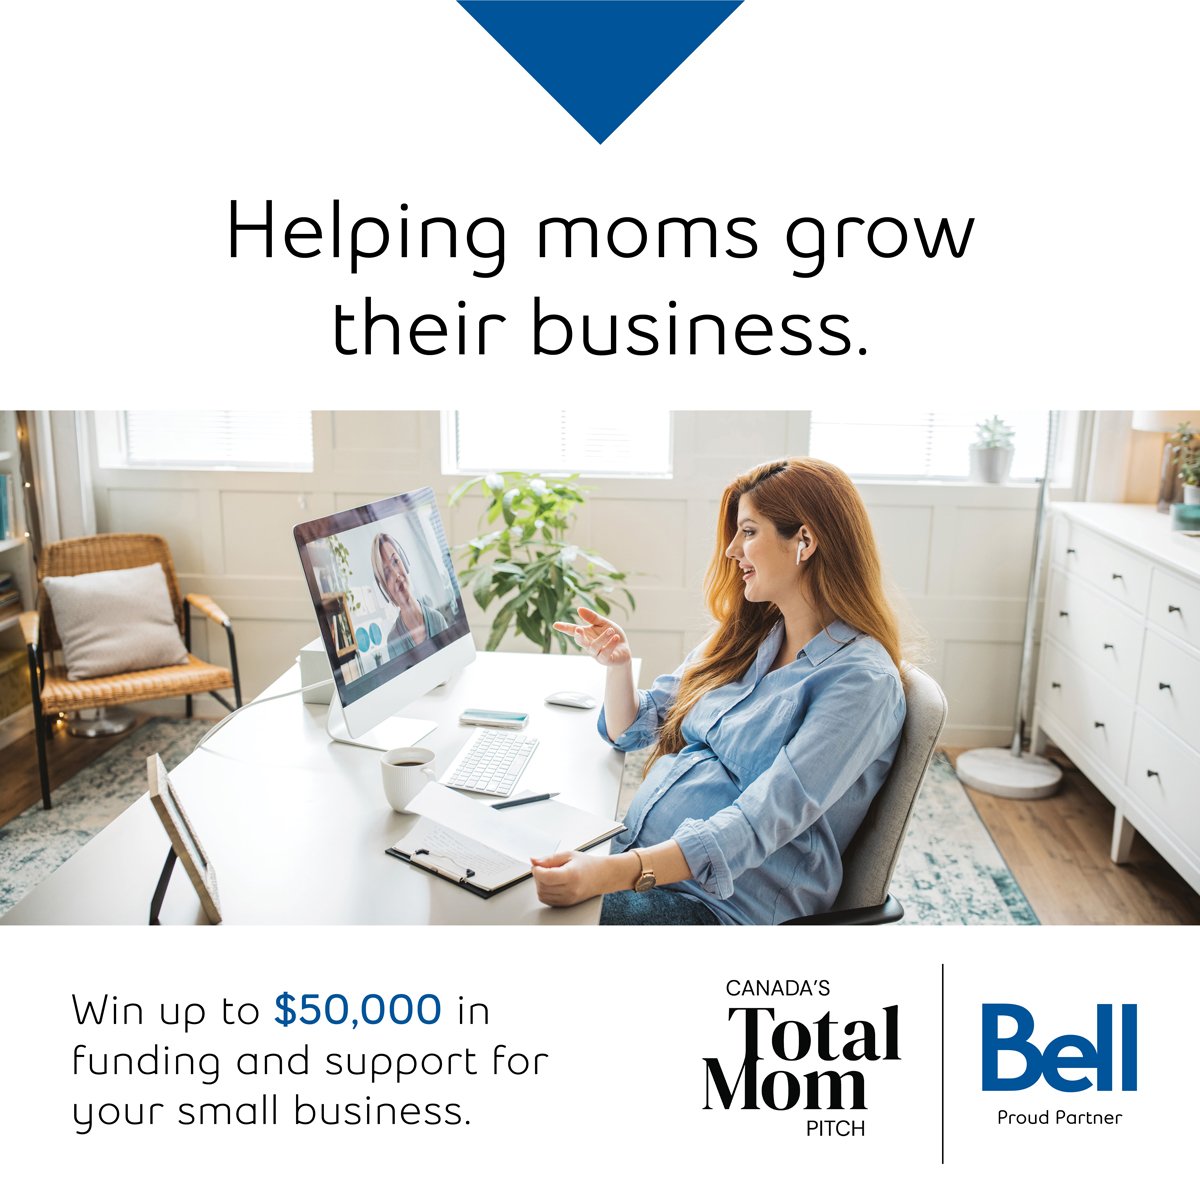 Bell is proud to partner with @totalmominc to support the advancement of women and small businesses across Canada. If you’re an entrepreneurial Mom, apply at totalmompitch.ca before February 9th. #BellforBetter #totalmompitch